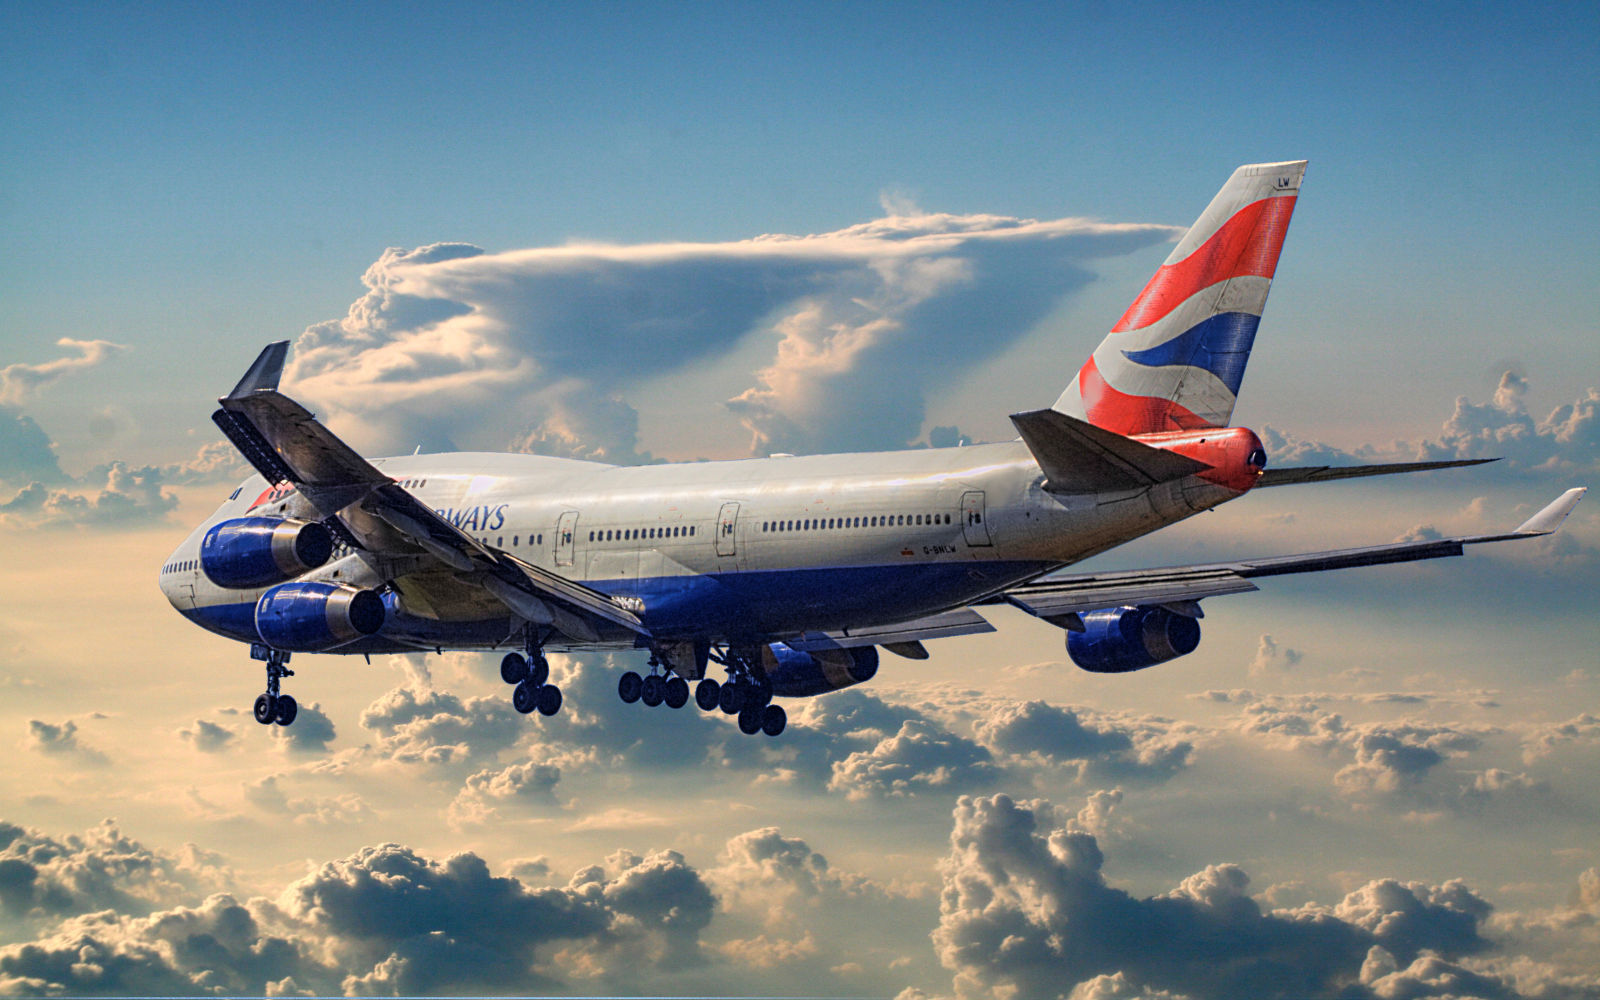 Illustration for article titled British Airways announced the retirement plan for its 747 fleet